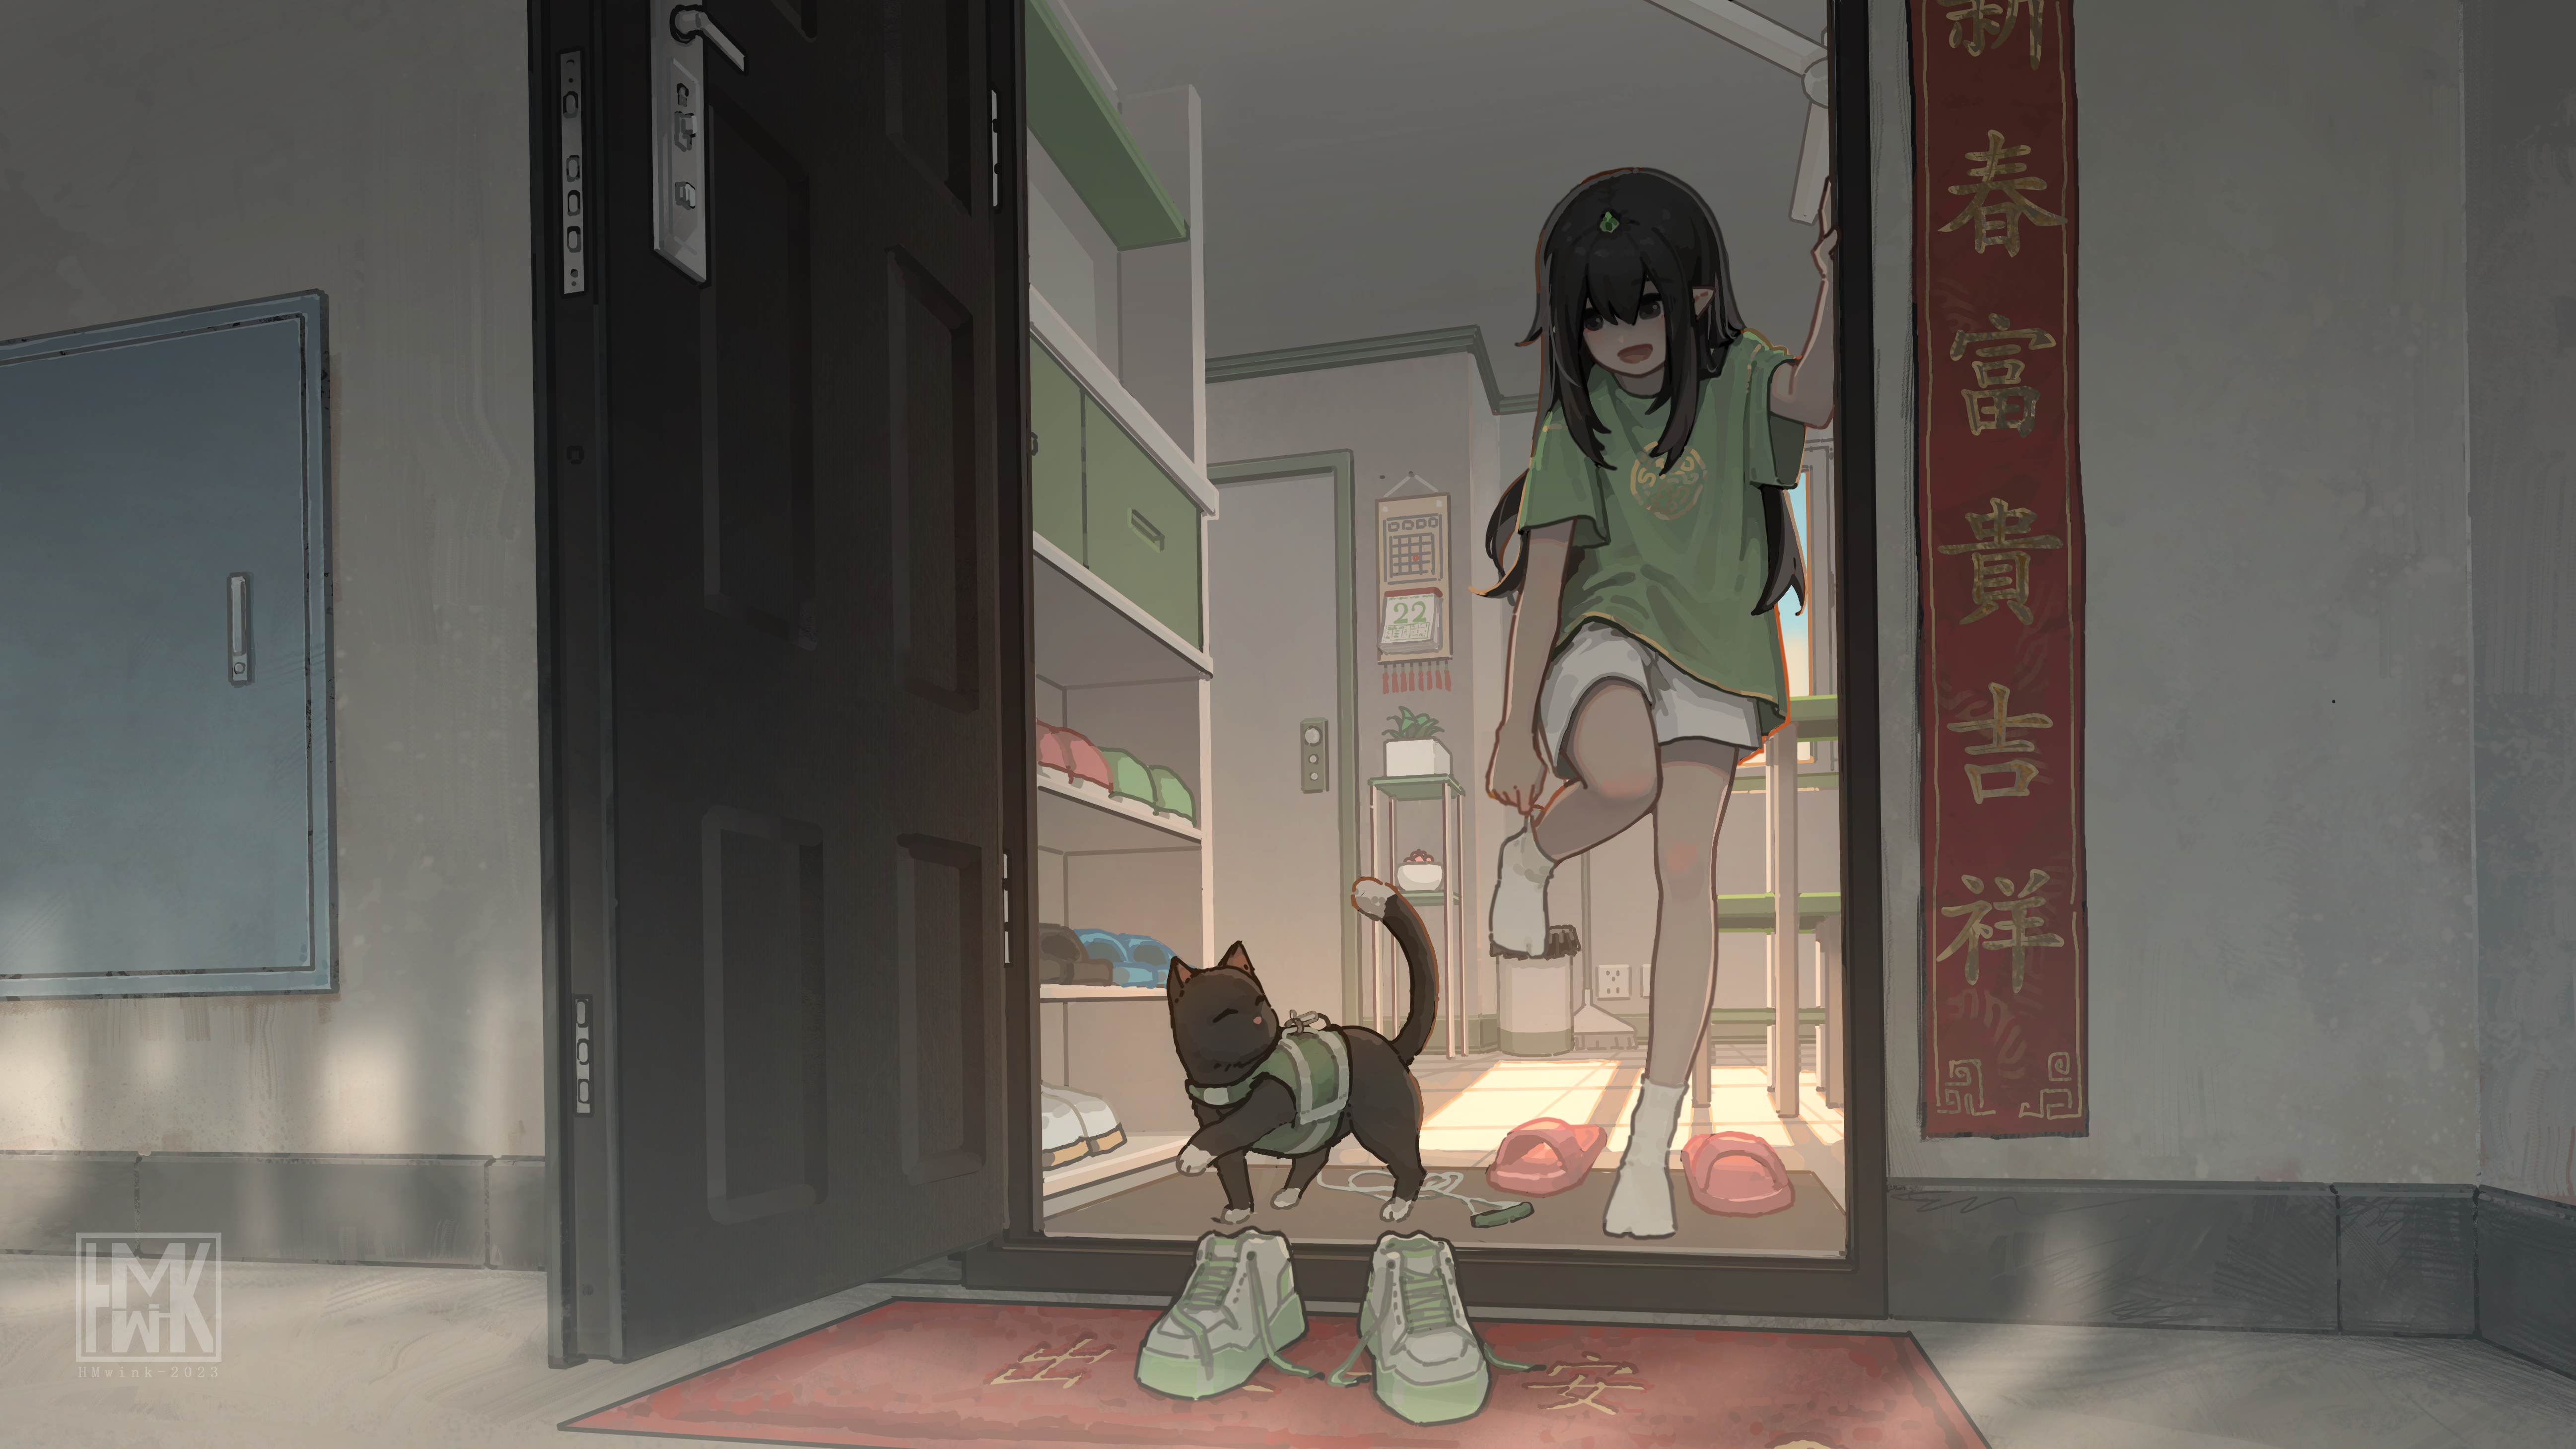 Anime 5189x2919 anime anime girls long hair cats shoes socks Hua Ming wink Yun Xi animals standing on one leg door doorways interior pointy ears Chinese white socks short socks pulling socks watermarked short sleeves shoes off